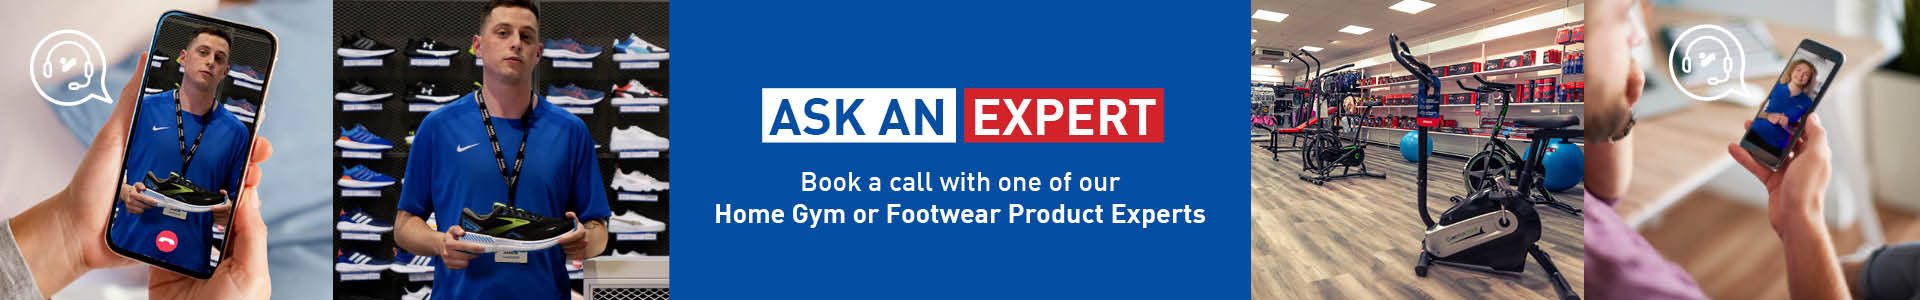 Ask an Expert with Intersport Elverys